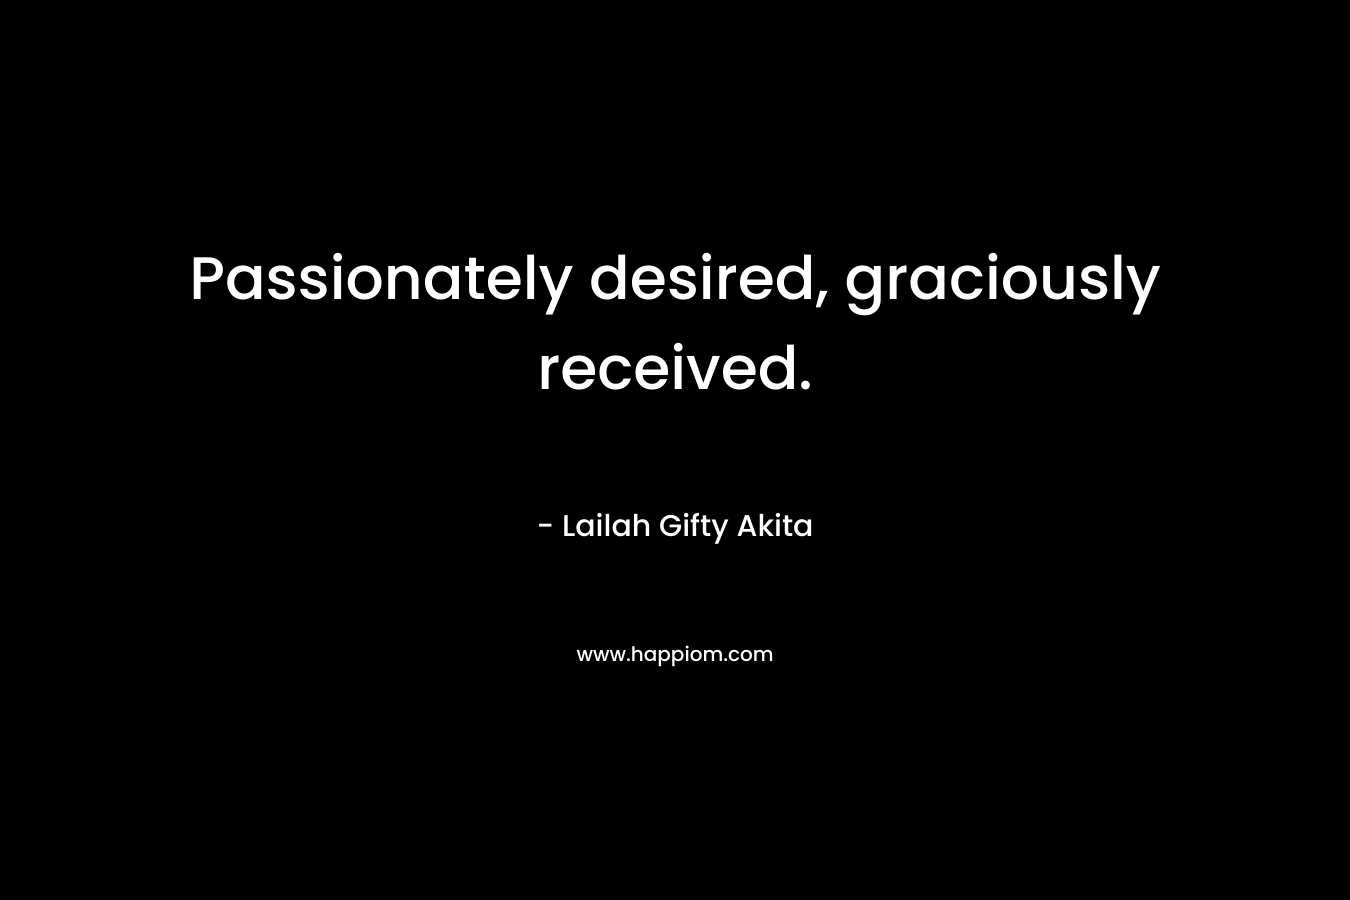 Passionately desired, graciously received. – Lailah Gifty Akita